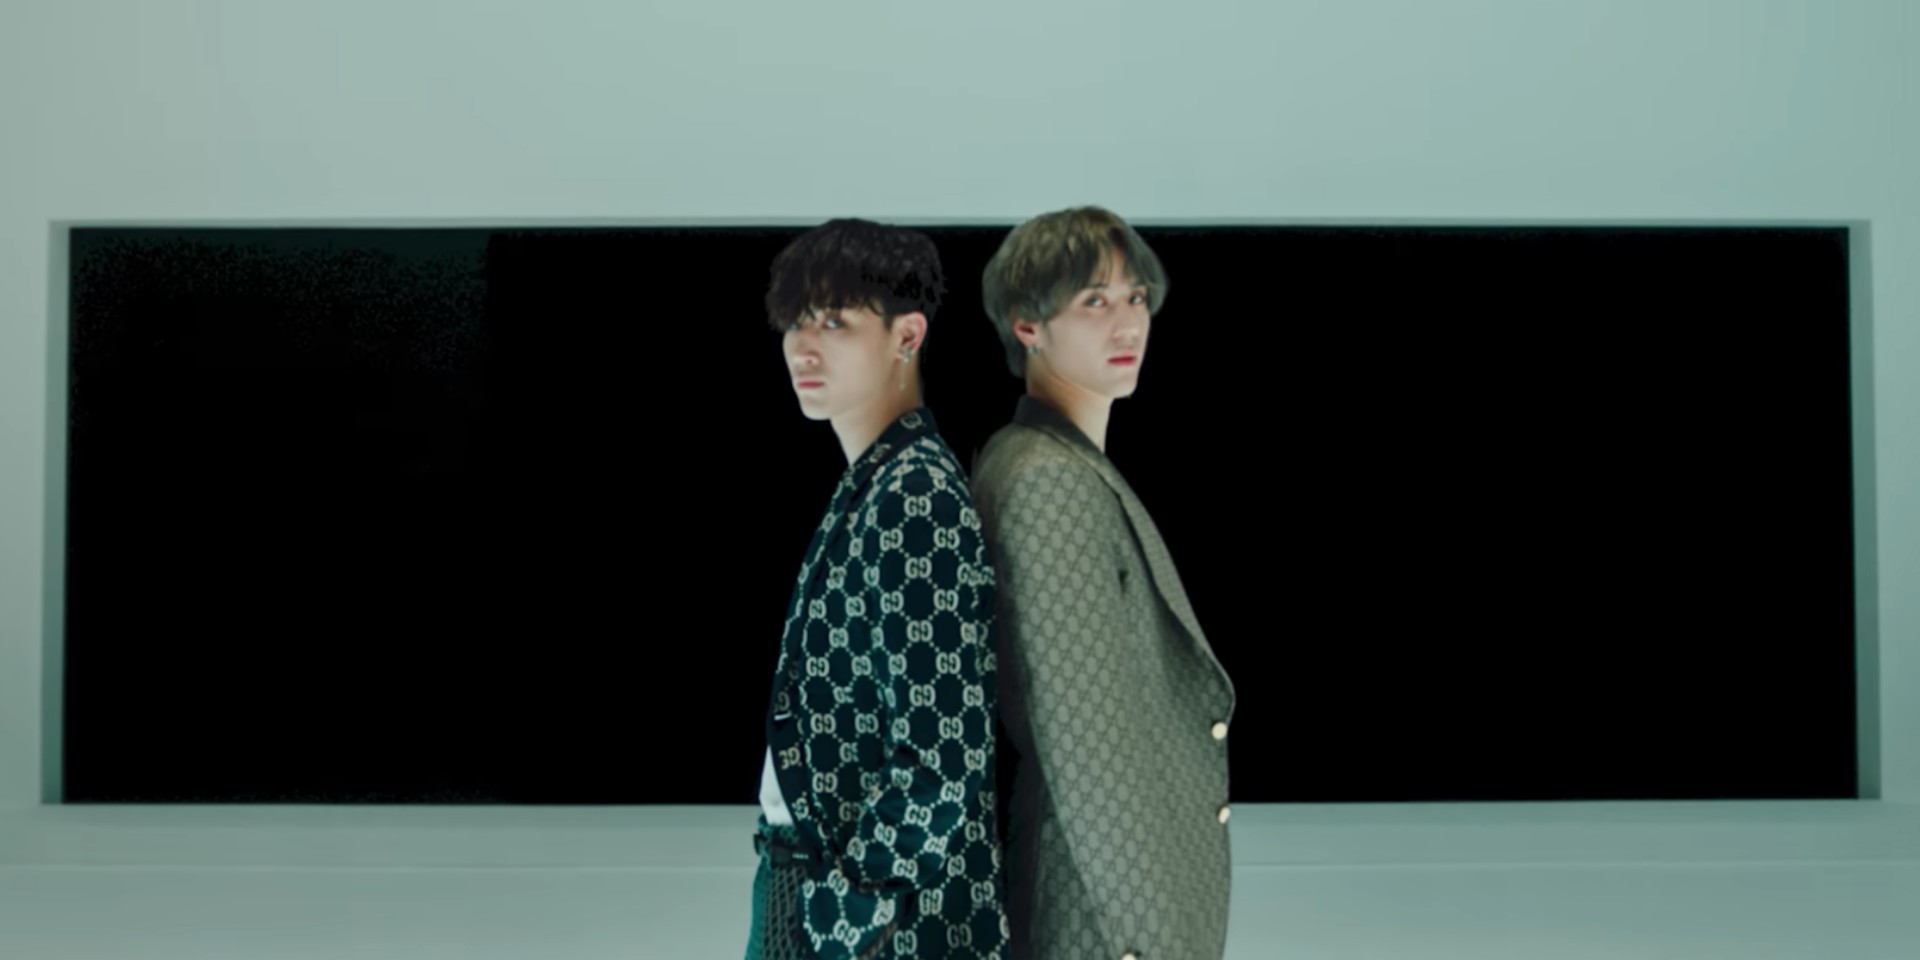 GOT7's subunit Jus2 releases new single and music video – watch